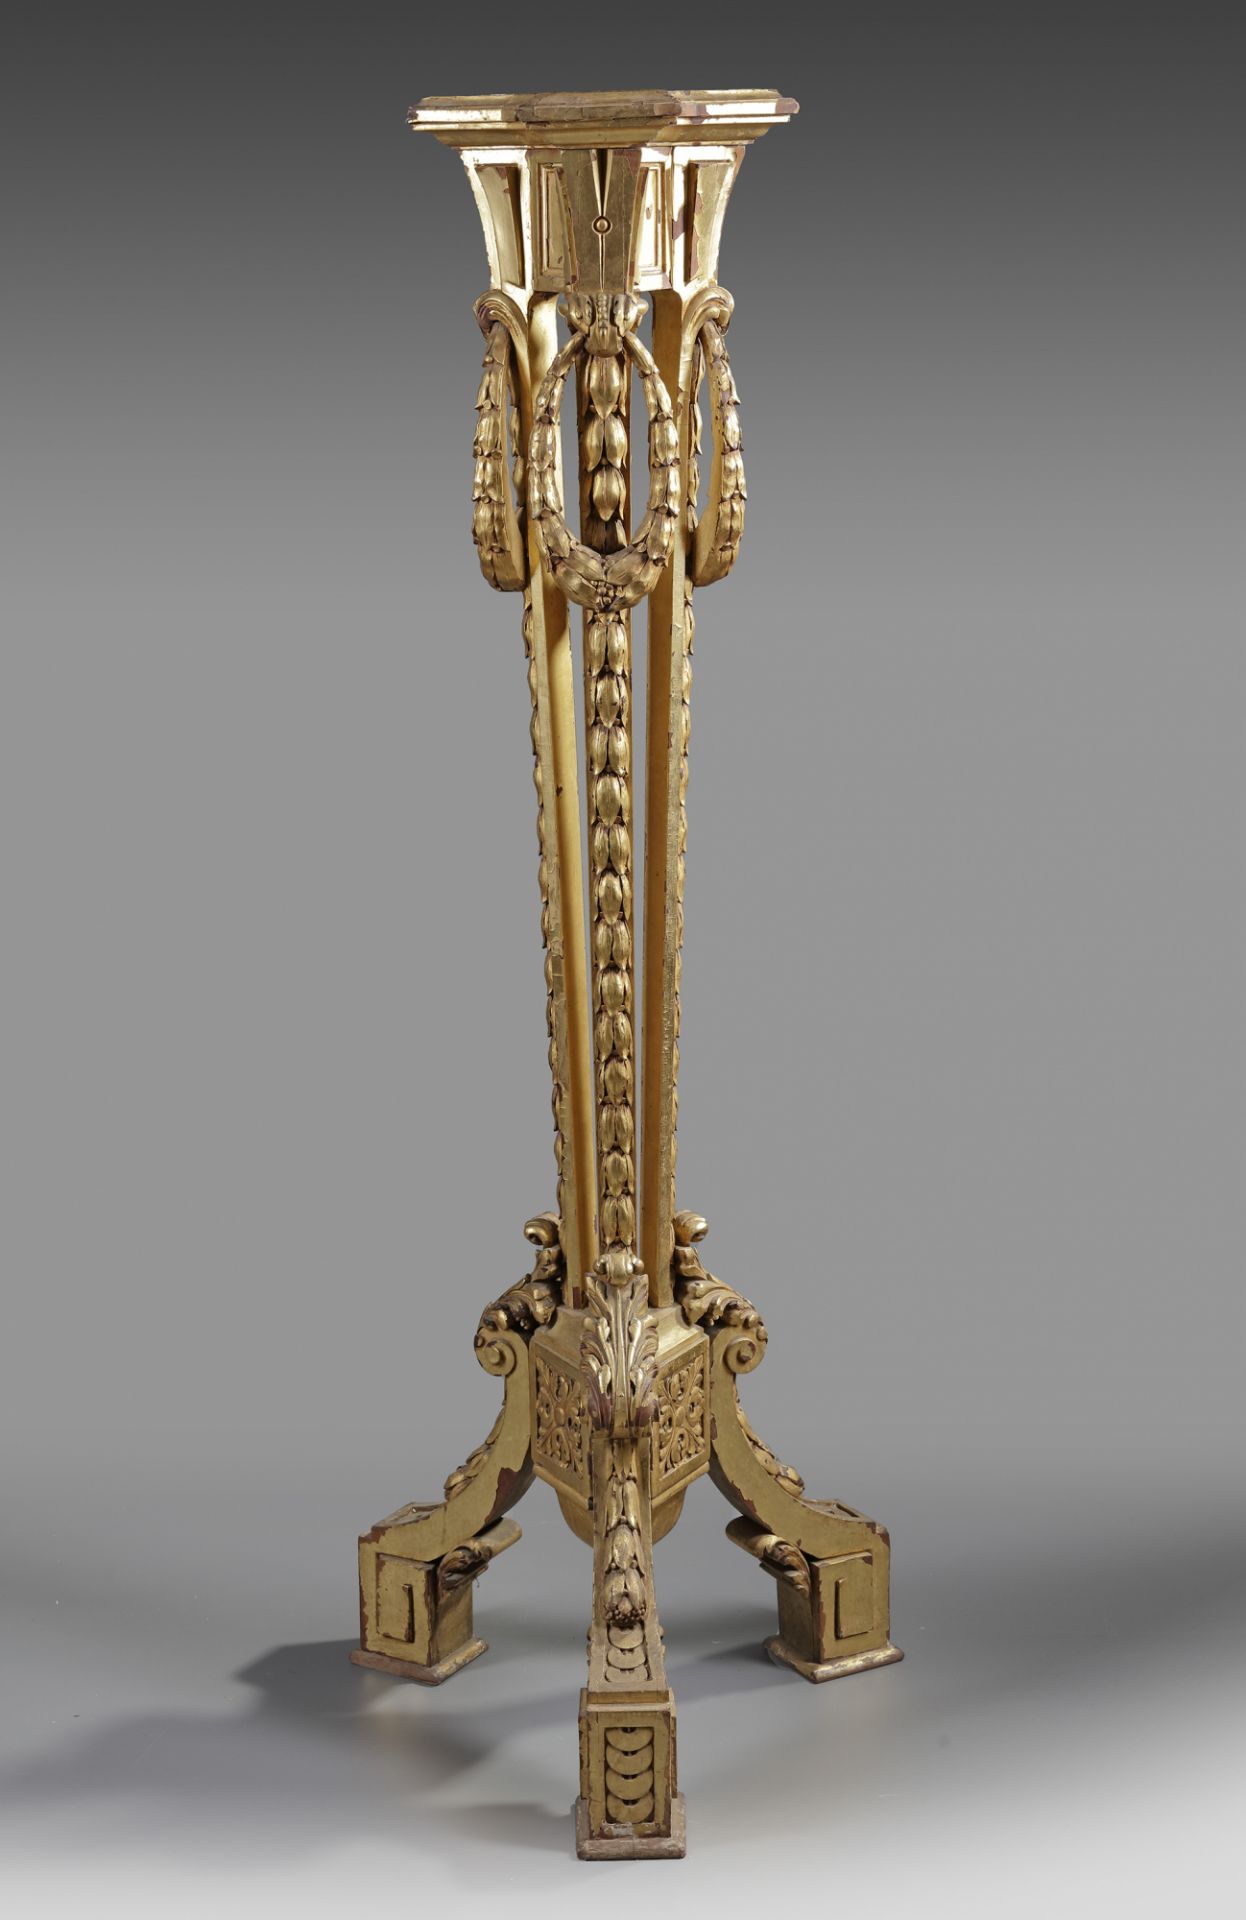 A FRENCH TRIPOD STAND, NAPOLEON III STYLE, LATE 19TH CENTURY